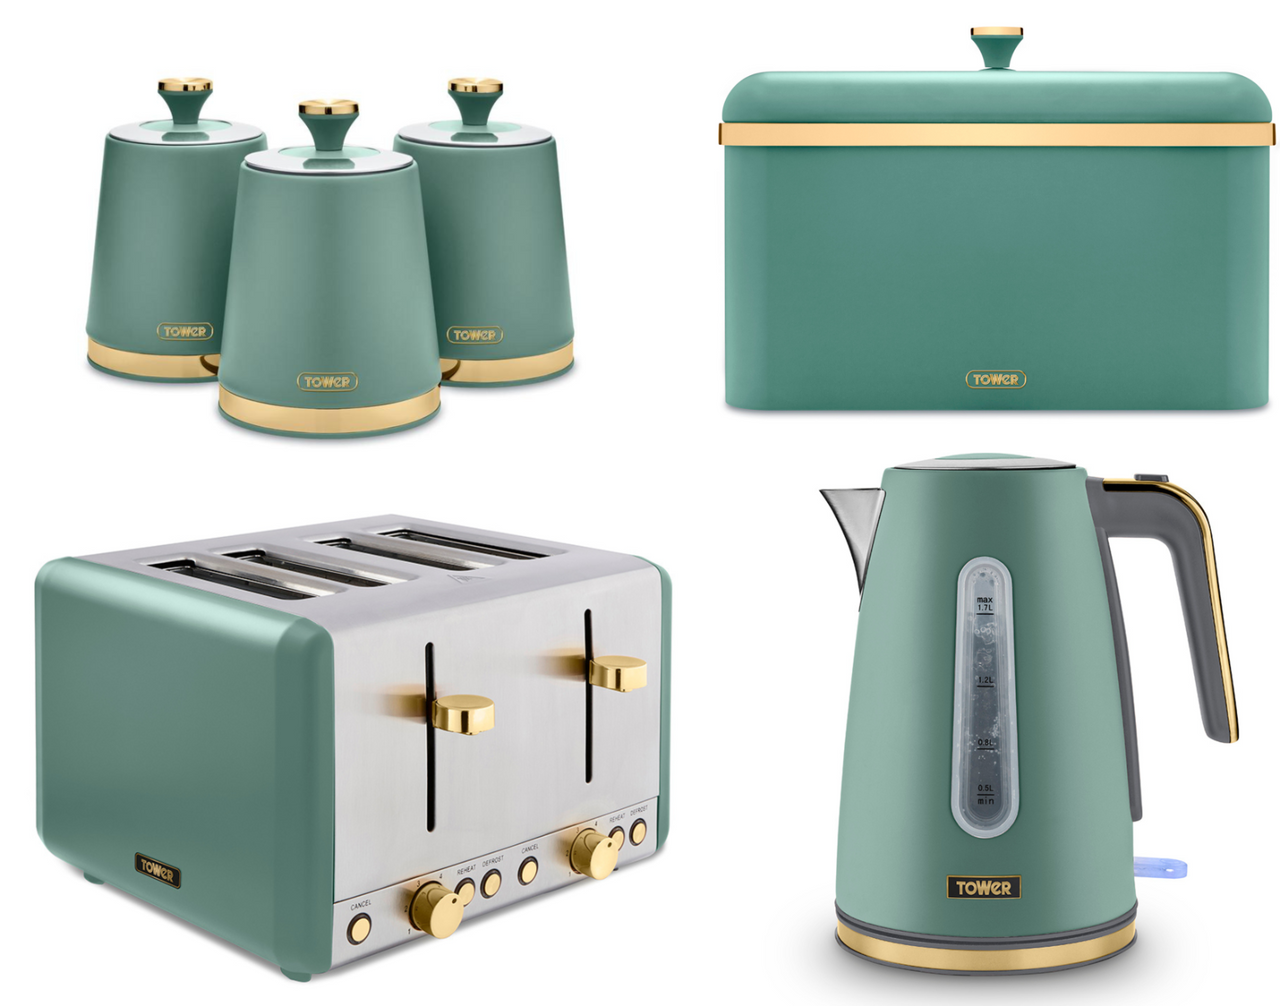 Tower Cavaletto Jade Jug Kettle, 4 Slice Toaster, Bread Bin & Canisters Matching Set of 6